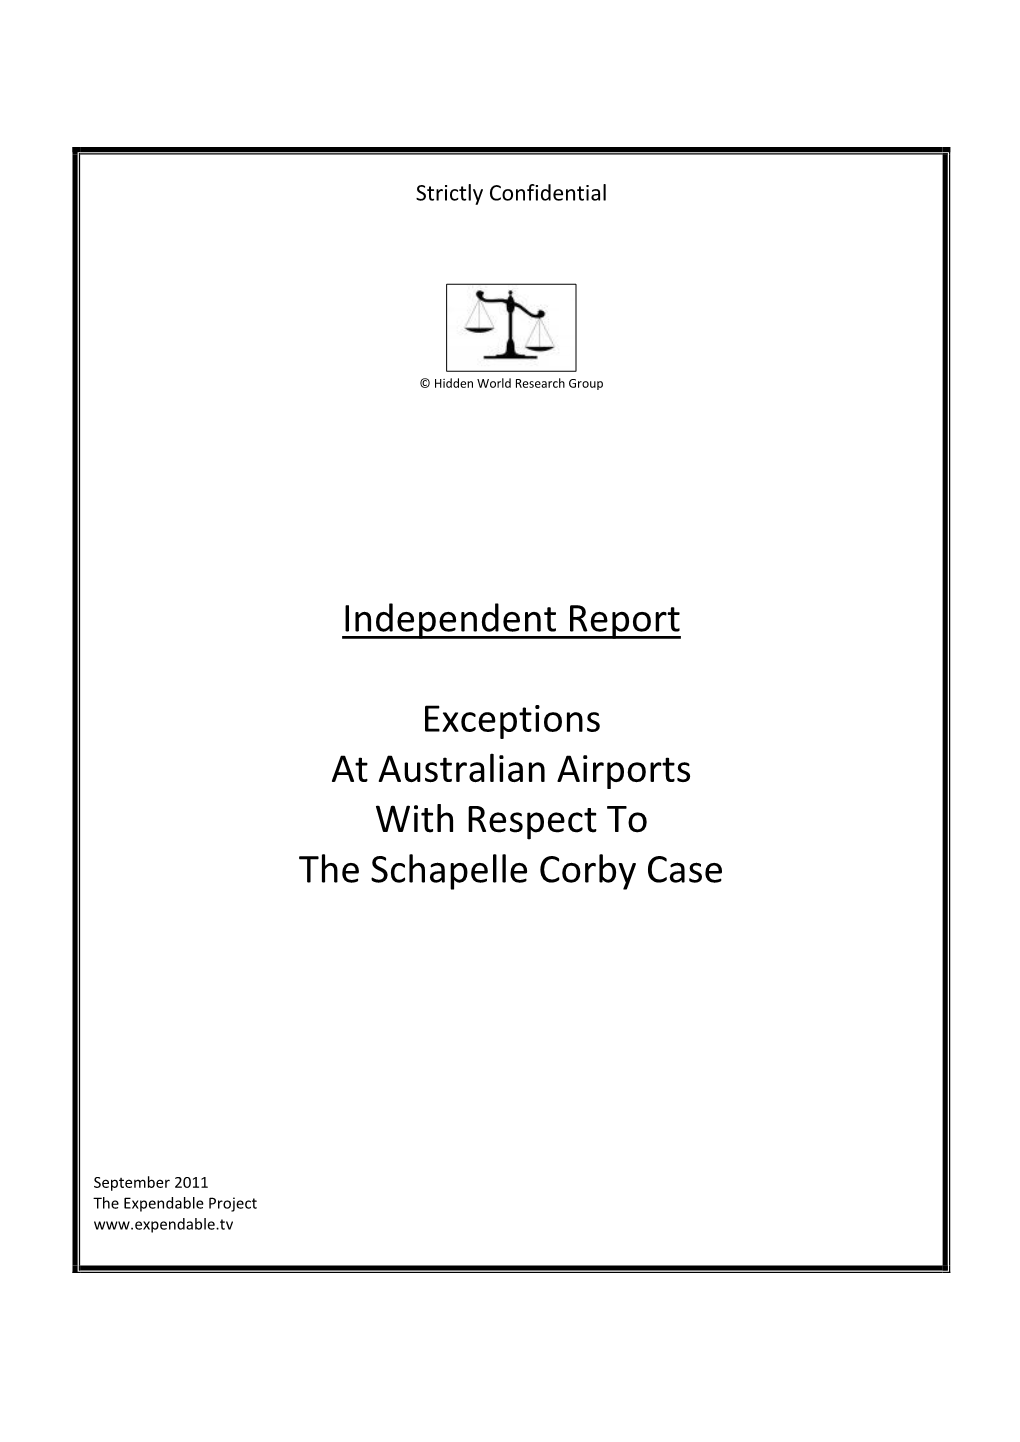 Independent Report Exceptions at Australian Airports with Respect To